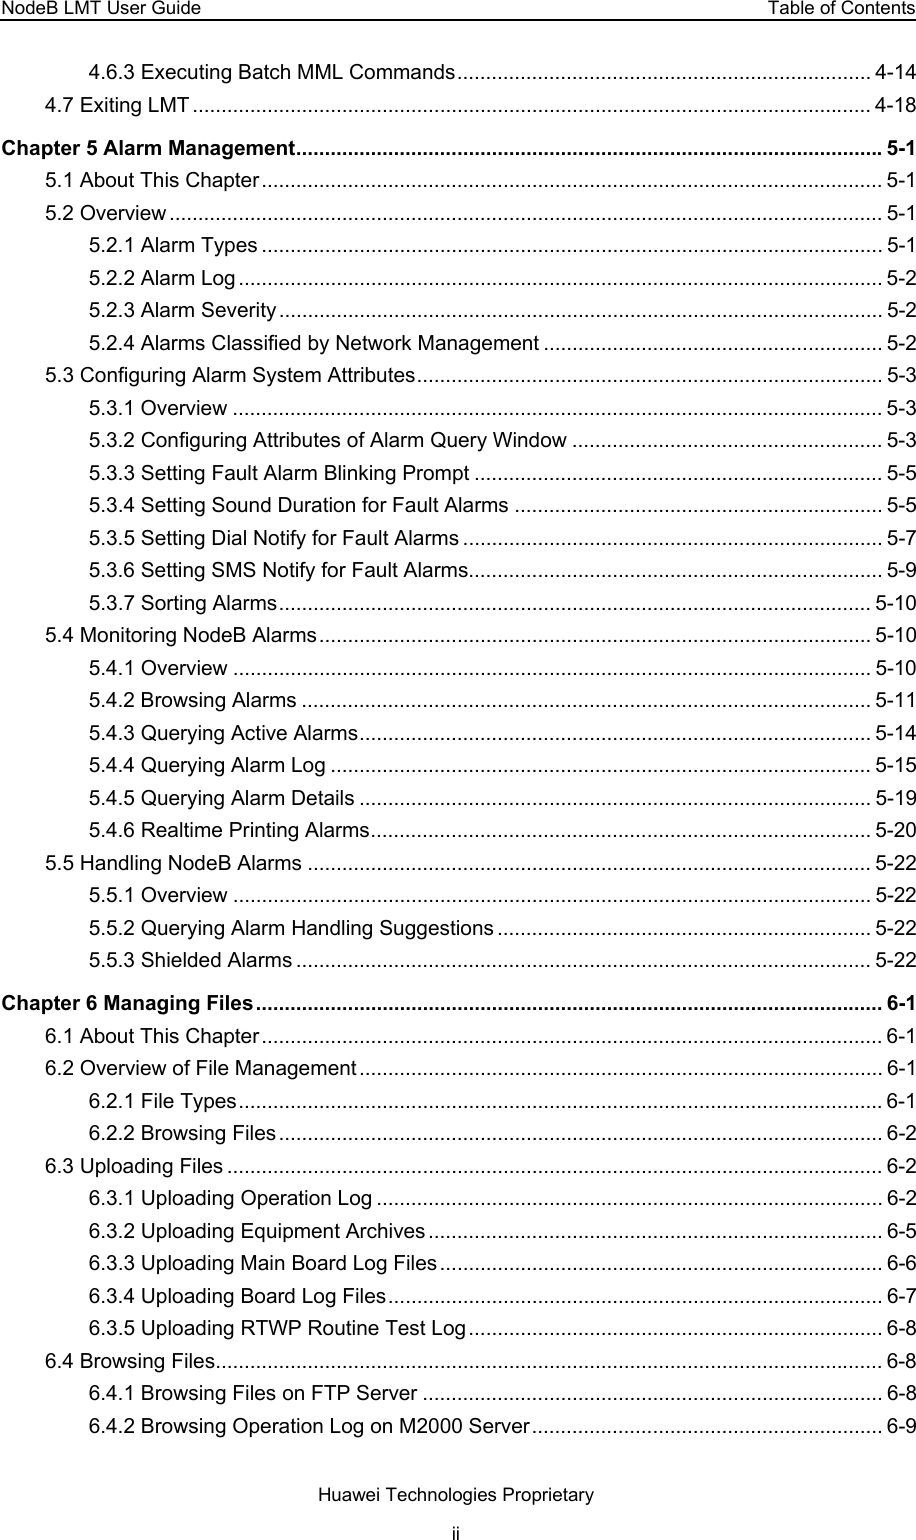 NodeB LMT User Guide  Table of Contents 4.6.3 Executing Batch MML Commands........................................................................ 4-14 4.7 Exiting LMT ...................................................................................................................... 4-18 Chapter 5 Alarm Management......................................................................................................5-1 5.1 About This Chapter............................................................................................................ 5-1 5.2 Overview ............................................................................................................................ 5-1 5.2.1 Alarm Types ............................................................................................................ 5-1 5.2.2 Alarm Log ................................................................................................................ 5-2 5.2.3 Alarm Severity......................................................................................................... 5-2 5.2.4 Alarms Classified by Network Management ........................................................... 5-2 5.3 Configuring Alarm System Attributes................................................................................. 5-3 5.3.1 Overview ................................................................................................................. 5-3 5.3.2 Configuring Attributes of Alarm Query Window ...................................................... 5-3 5.3.3 Setting Fault Alarm Blinking Prompt ....................................................................... 5-5 5.3.4 Setting Sound Duration for Fault Alarms ................................................................ 5-5 5.3.5 Setting Dial Notify for Fault Alarms ......................................................................... 5-7 5.3.6 Setting SMS Notify for Fault Alarms........................................................................ 5-9 5.3.7 Sorting Alarms....................................................................................................... 5-10 5.4 Monitoring NodeB Alarms................................................................................................ 5-10 5.4.1 Overview ............................................................................................................... 5-10 5.4.2 Browsing Alarms ................................................................................................... 5-11 5.4.3 Querying Active Alarms......................................................................................... 5-14 5.4.4 Querying Alarm Log .............................................................................................. 5-15 5.4.5 Querying Alarm Details ......................................................................................... 5-19 5.4.6 Realtime Printing Alarms....................................................................................... 5-20 5.5 Handling NodeB Alarms .................................................................................................. 5-22 5.5.1 Overview ............................................................................................................... 5-22 5.5.2 Querying Alarm Handling Suggestions ................................................................. 5-22 5.5.3 Shielded Alarms .................................................................................................... 5-22 Chapter 6 Managing Files............................................................................................................. 6-1 6.1 About This Chapter............................................................................................................ 6-1 6.2 Overview of File Management ........................................................................................... 6-1 6.2.1 File Types................................................................................................................6-1 6.2.2 Browsing Files ......................................................................................................... 6-2 6.3 Uploading Files .................................................................................................................. 6-2 6.3.1 Uploading Operation Log ........................................................................................ 6-2 6.3.2 Uploading Equipment Archives ............................................................................... 6-5 6.3.3 Uploading Main Board Log Files ............................................................................. 6-6 6.3.4 Uploading Board Log Files...................................................................................... 6-7 6.3.5 Uploading RTWP Routine Test Log........................................................................ 6-8 6.4 Browsing Files.................................................................................................................... 6-8 6.4.1 Browsing Files on FTP Server ................................................................................ 6-8 6.4.2 Browsing Operation Log on M2000 Server............................................................. 6-9 Huawei Technologies Proprietary ii 